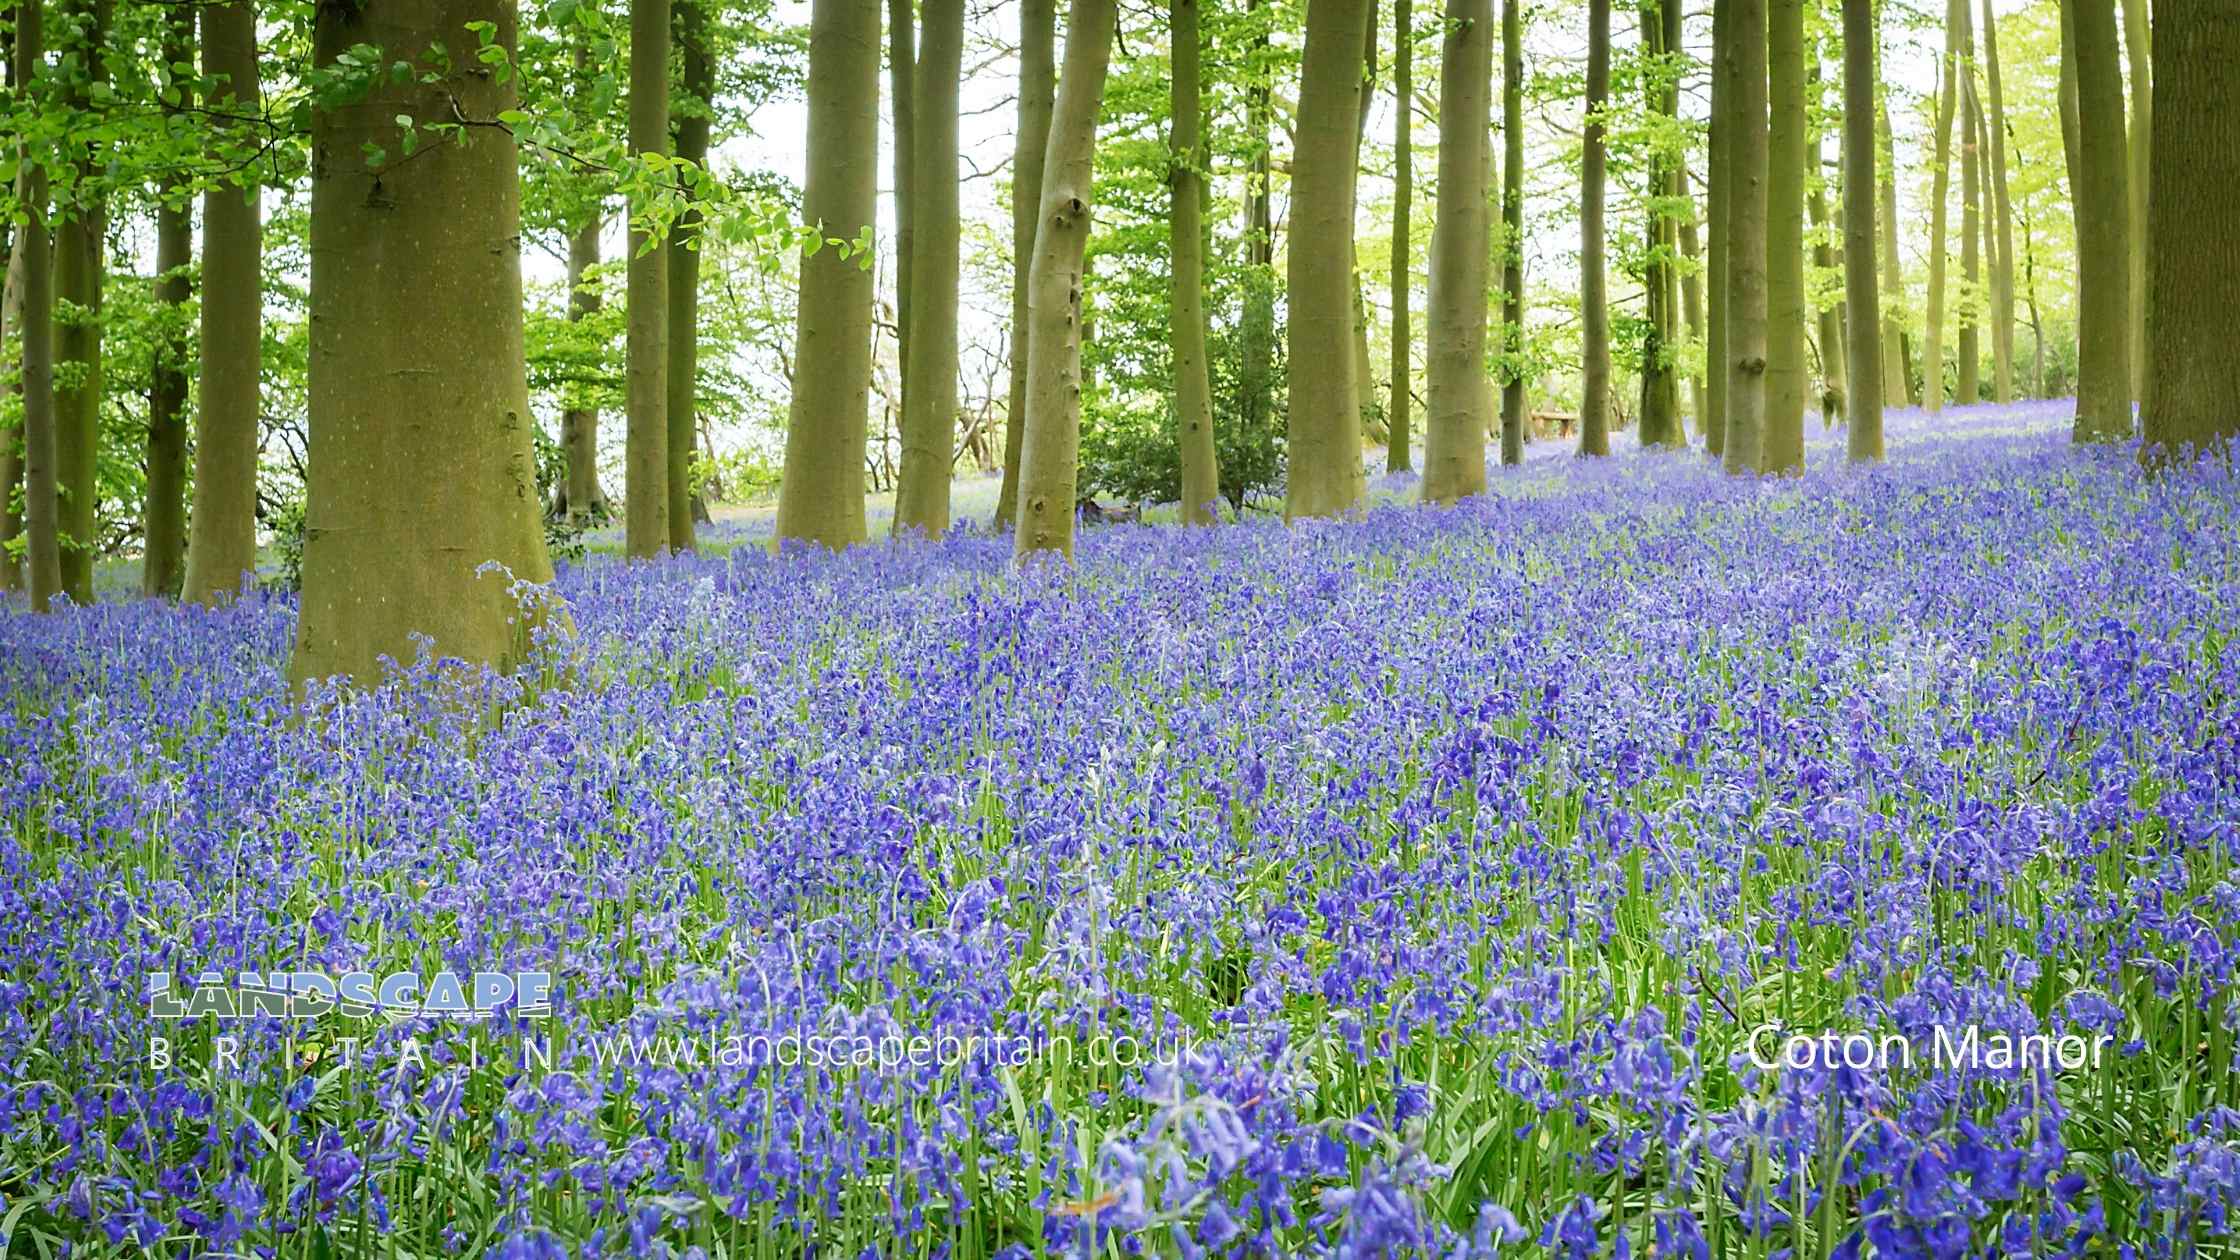 Bluebell Woods in Northampton